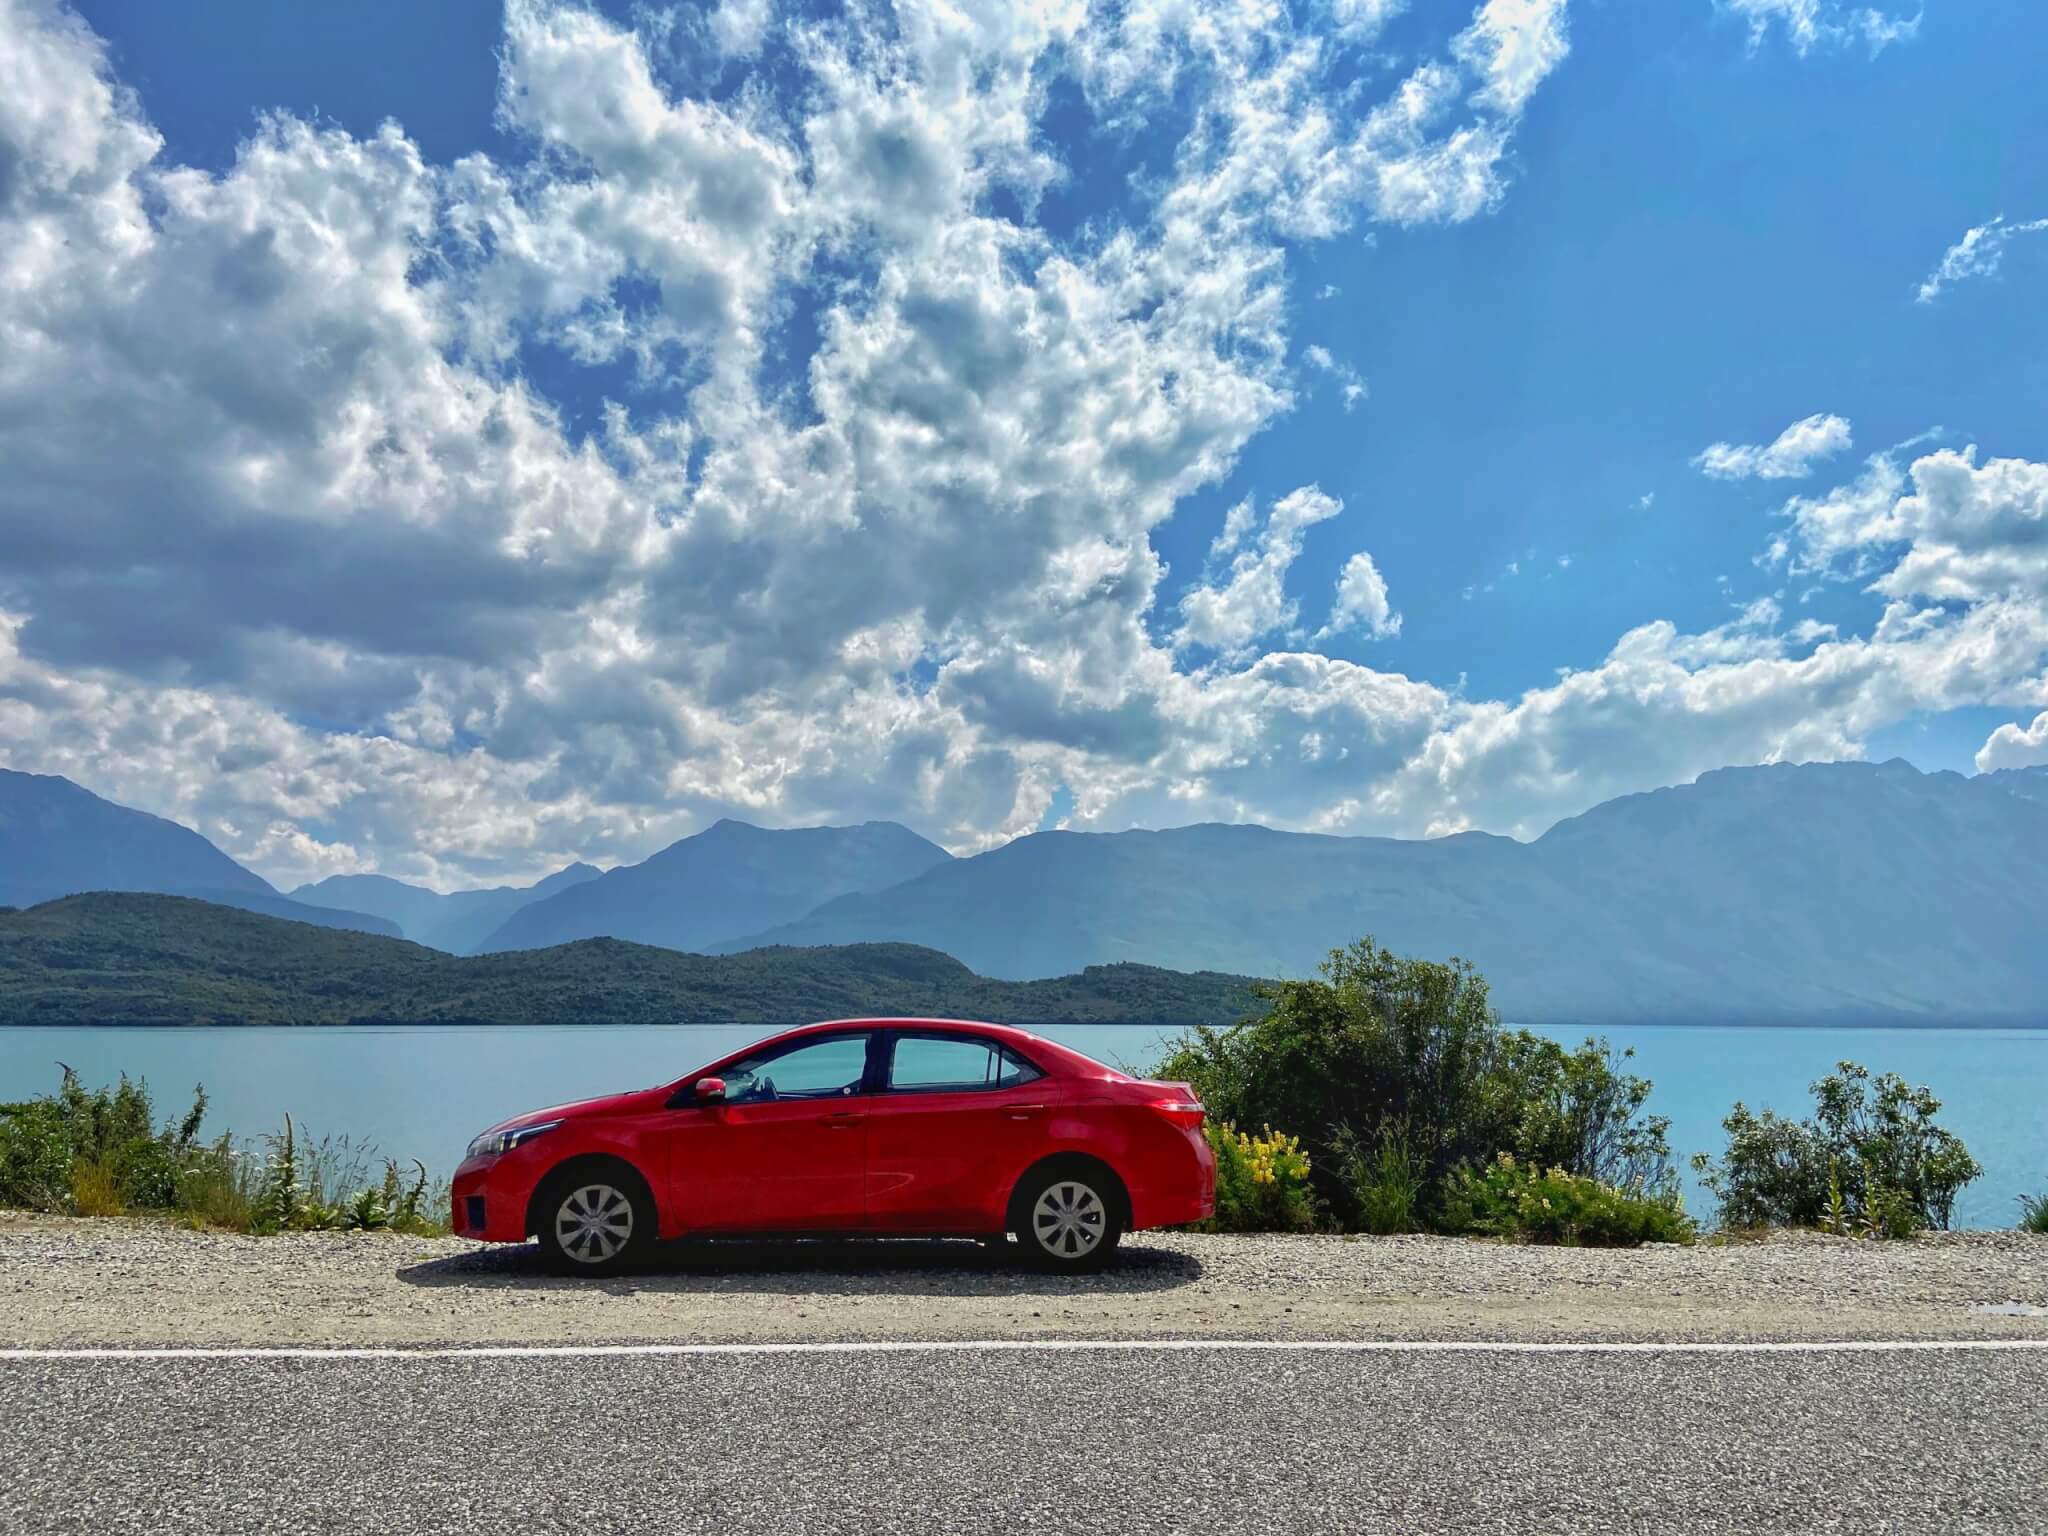 Car parked on the banks of lake wakatipu on a road trip in new zealand